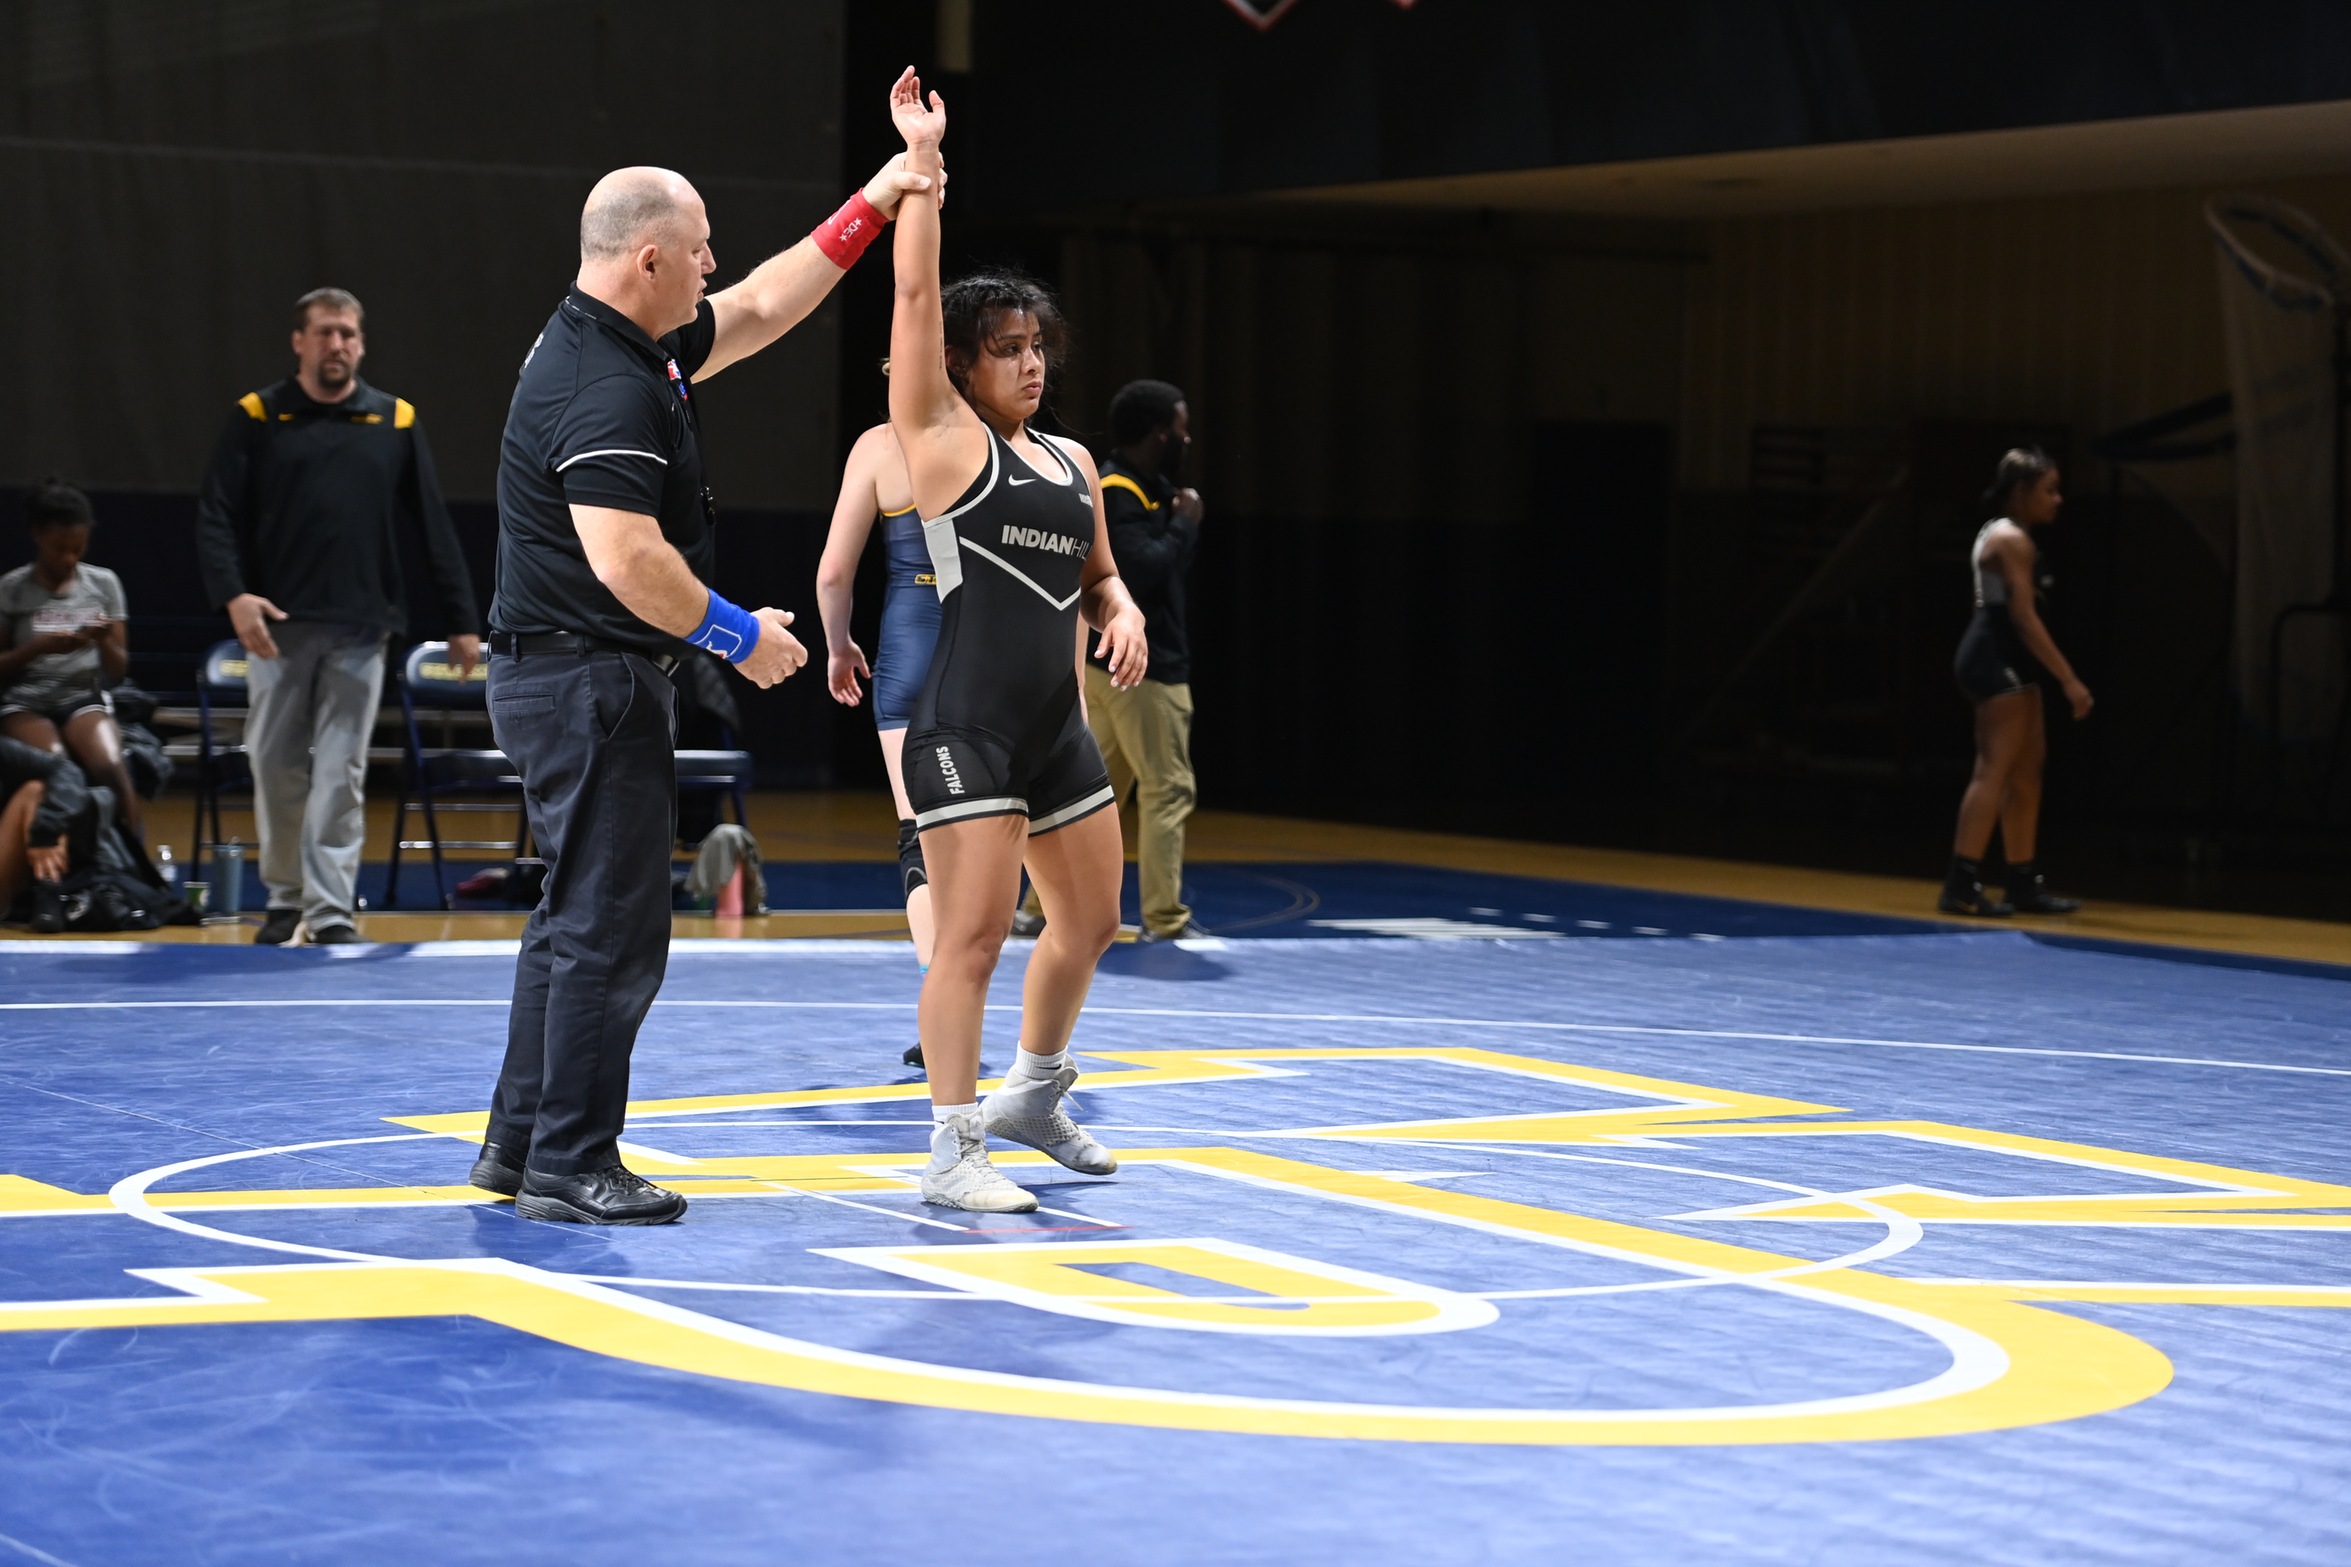 WARRIORS EARN FIRST DUAL WIN OF THE YEAR